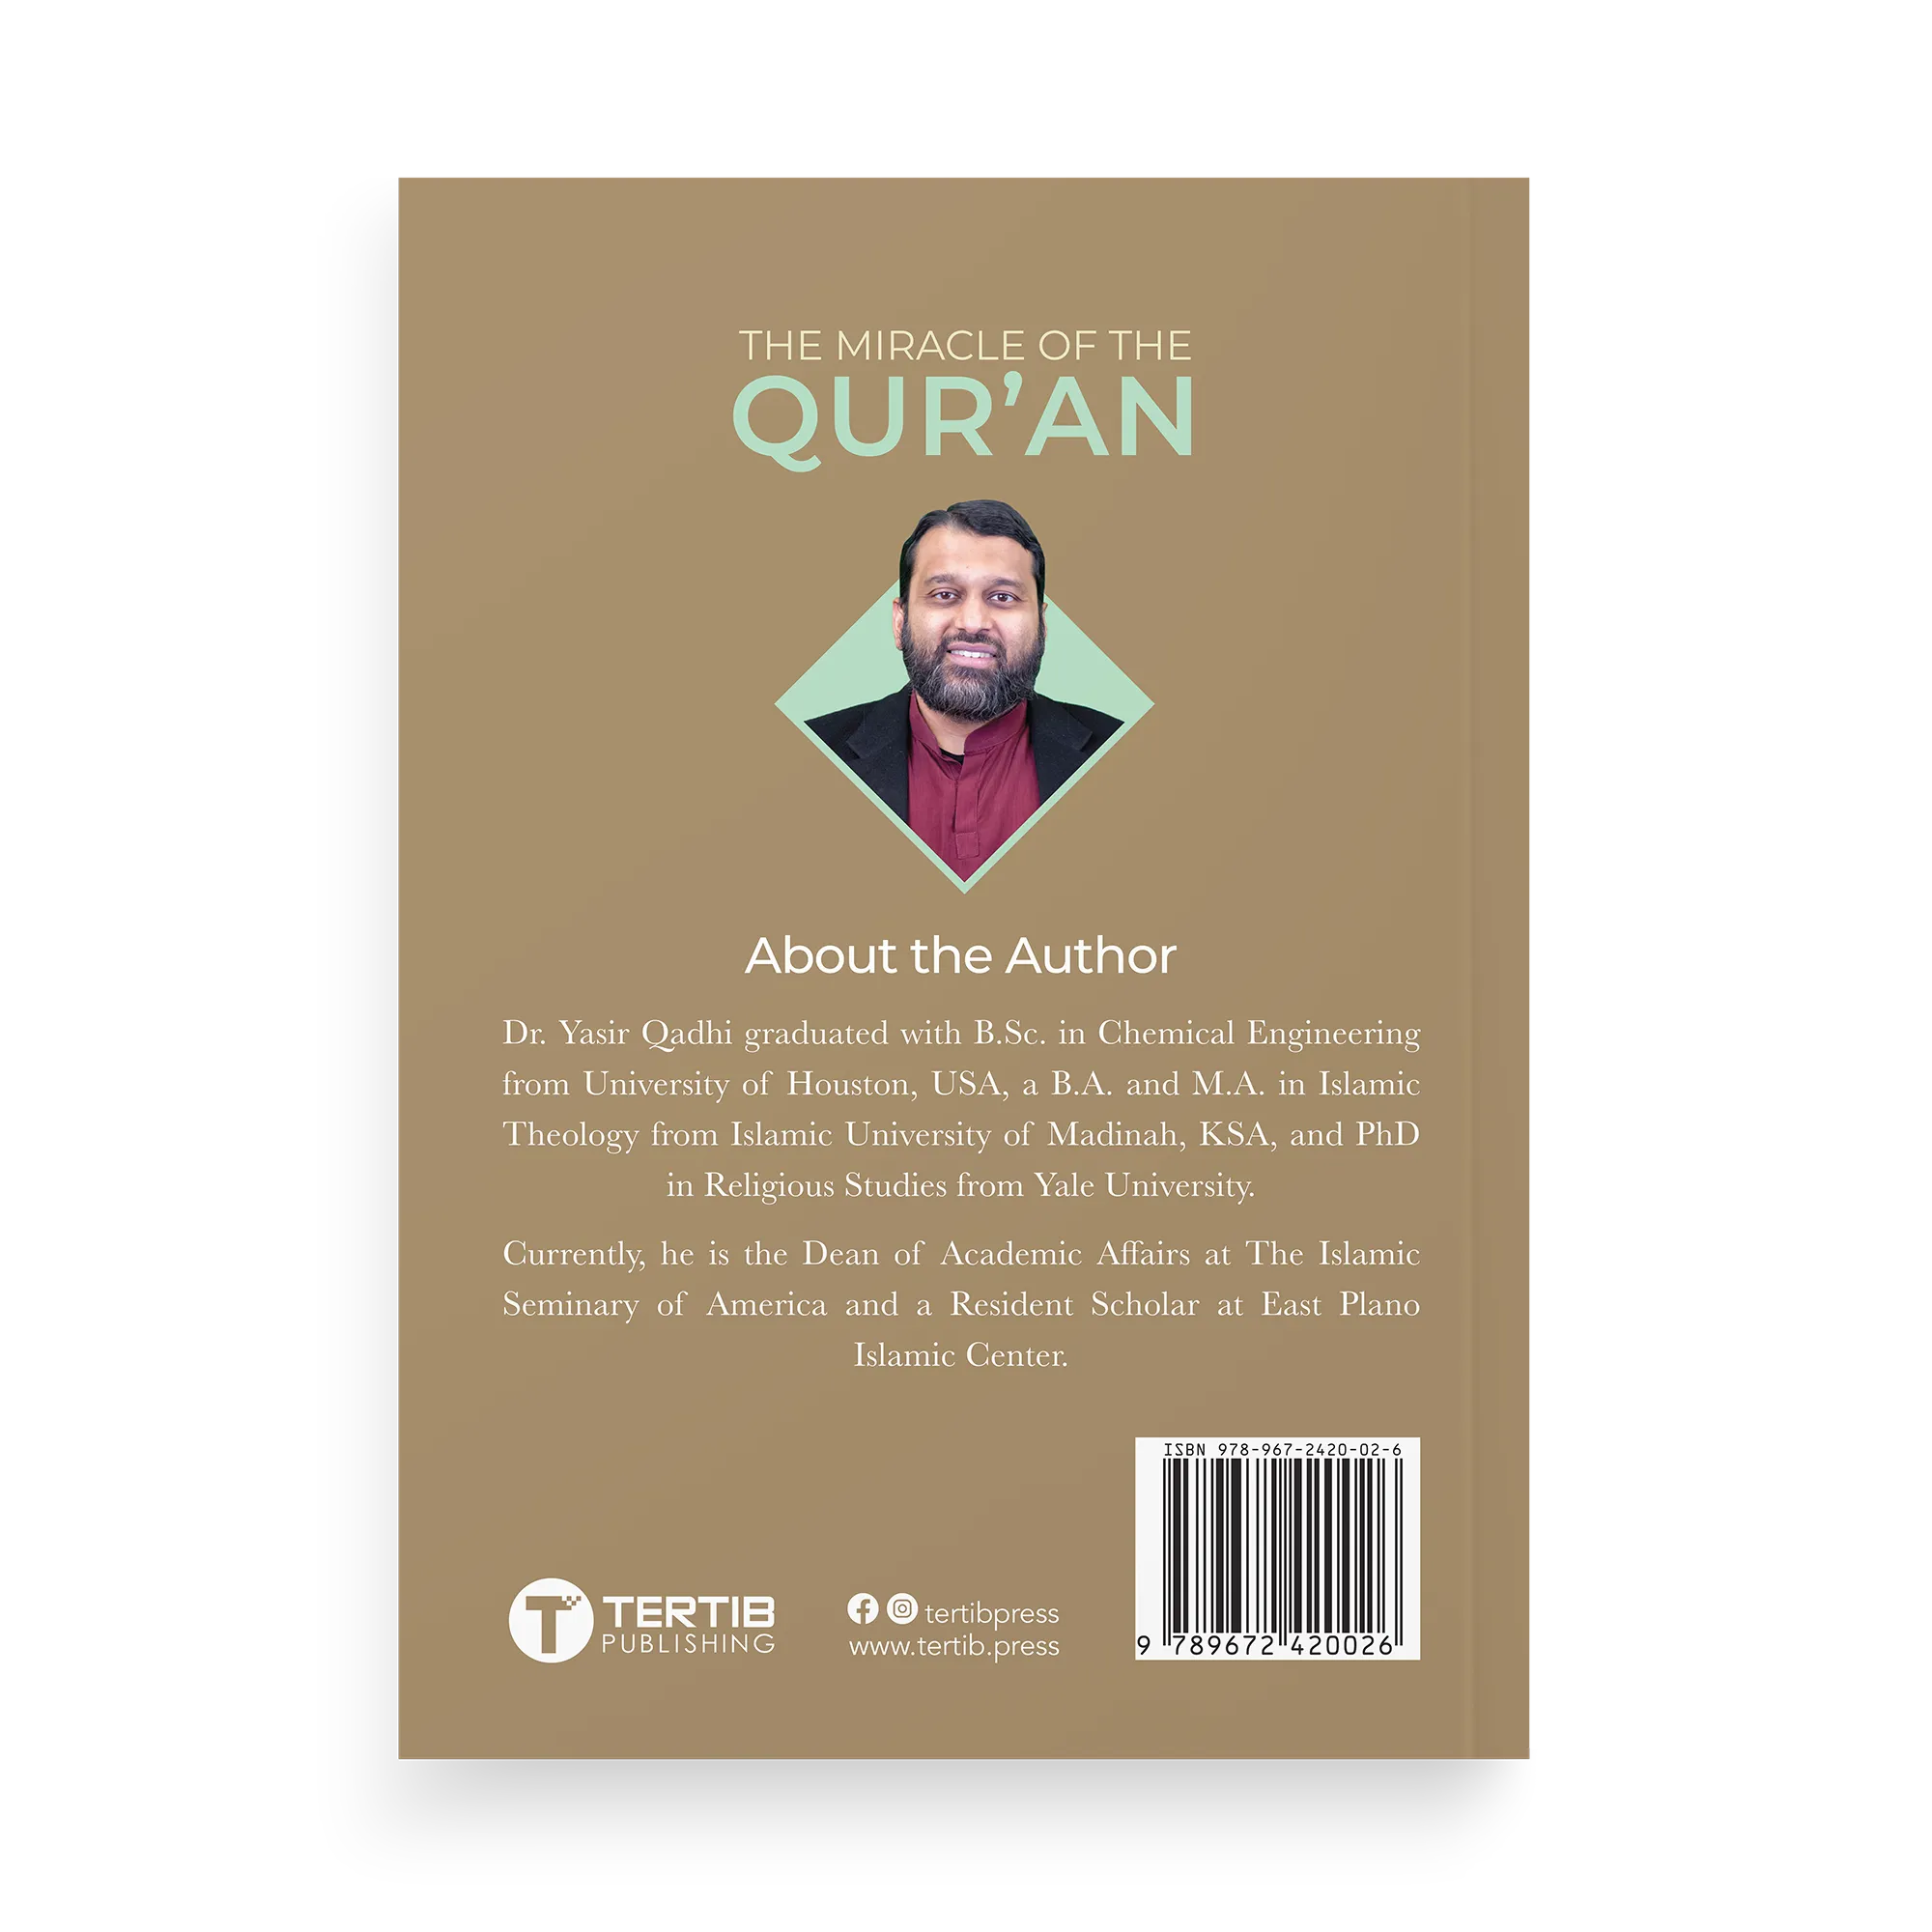 The Miracle of the Quran by Dr Yasir Qadhi